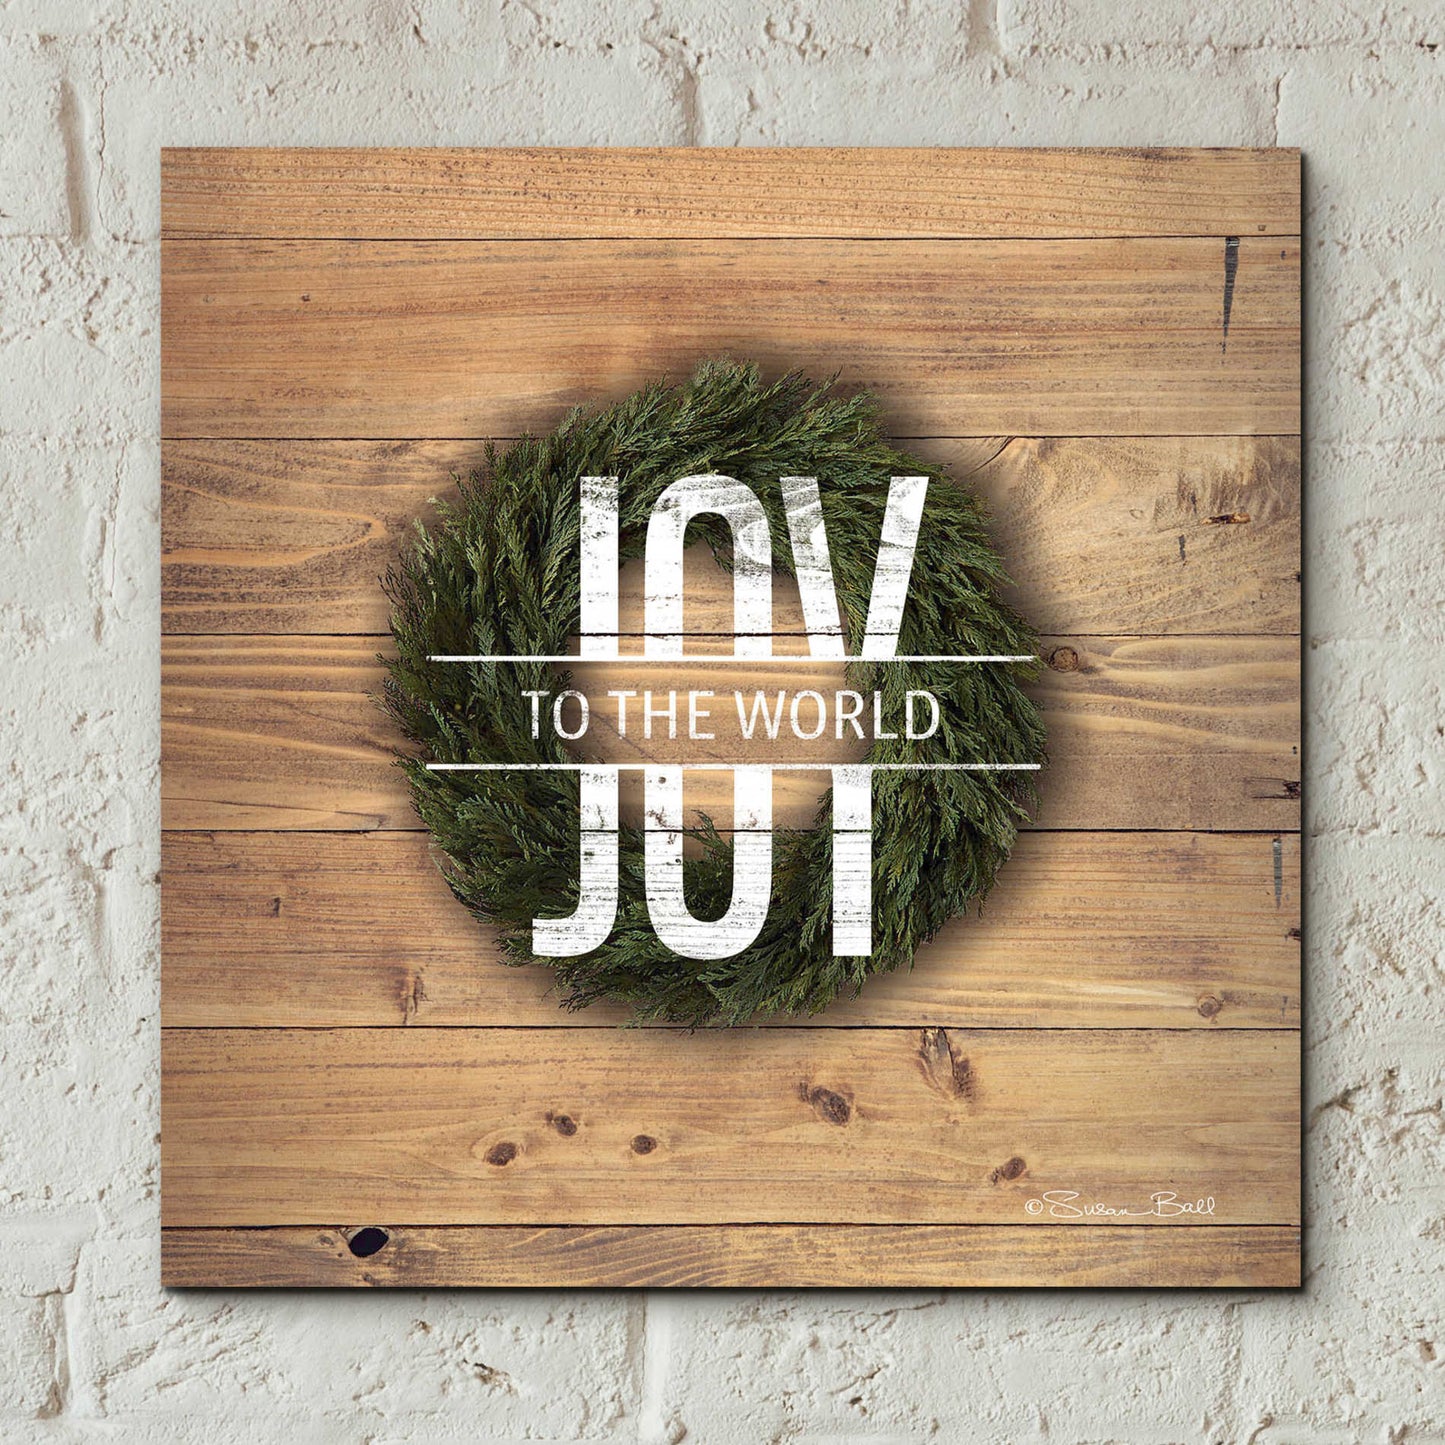 Epic Art 'Joy to the World with Wreath' by Susan Ball, Acrylic Glass Wall Art,12x12